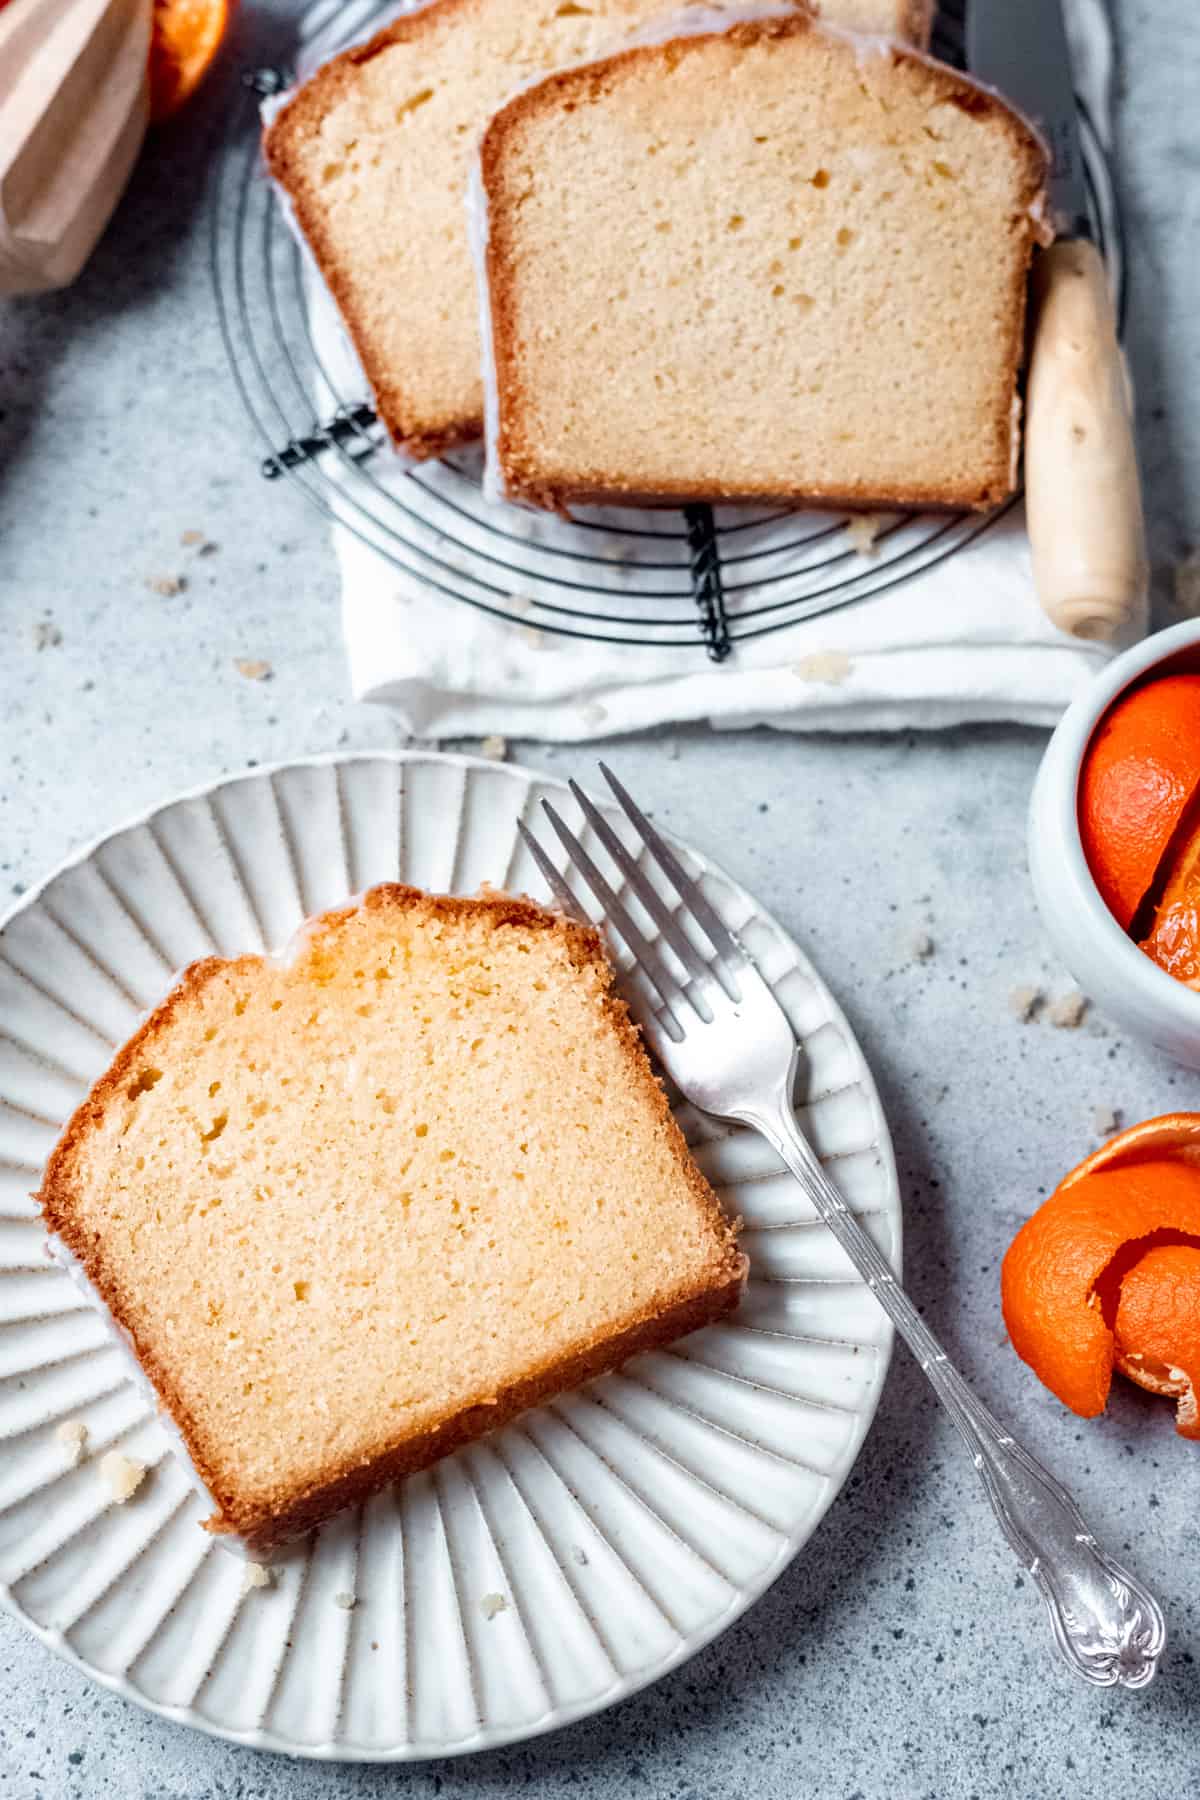 This Pound Cake is Fabulous (and So Pretty on a Platter) - Family Savvy